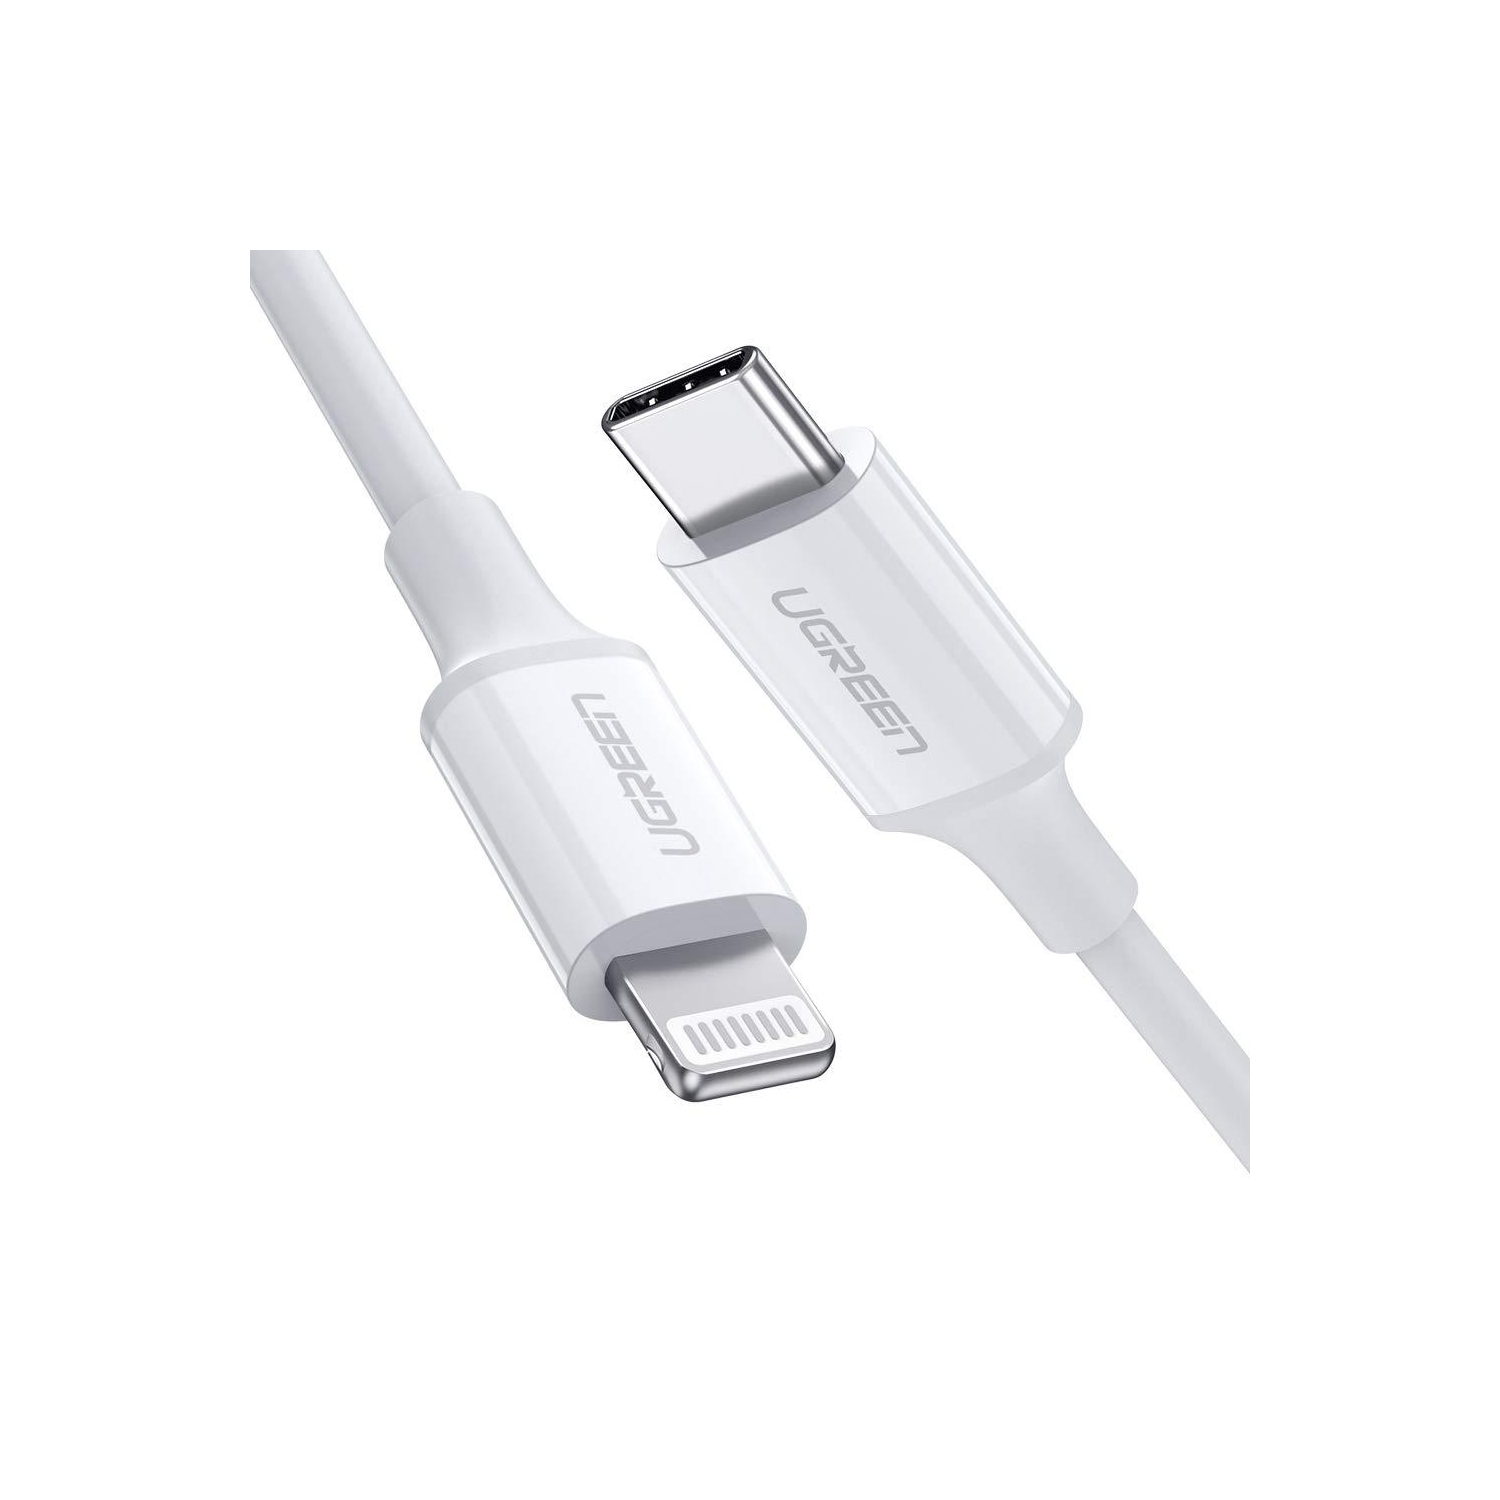 UGREEN USB C to Lightning Cable Type C PD Charging 3FT, White